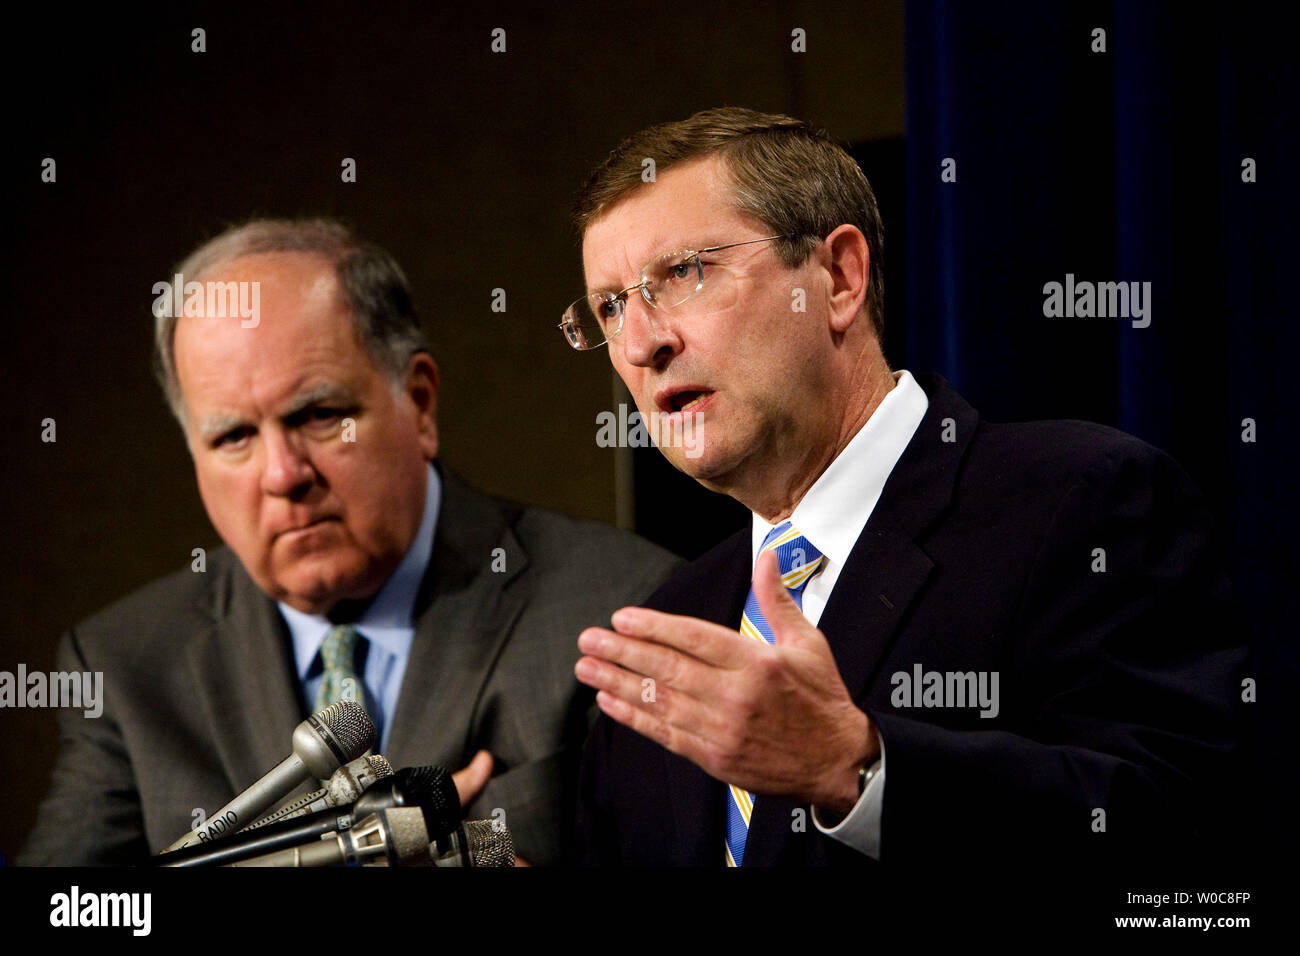 House Budget Chairman John Spratt, D-SC, (L) looks on as Senate Budget Chairman Kent Conrad, D-ND, speaks during a news conference to discuss the new deficit projections in the Office of Management and Budget's fiscal year 2009 mid-year review on Capitol Hill in Washington on July 28, 2008. The federal deficit is projected to be $482 billion for 2009. (UPI Photo/Patrick D. McDermott) Stock Photo